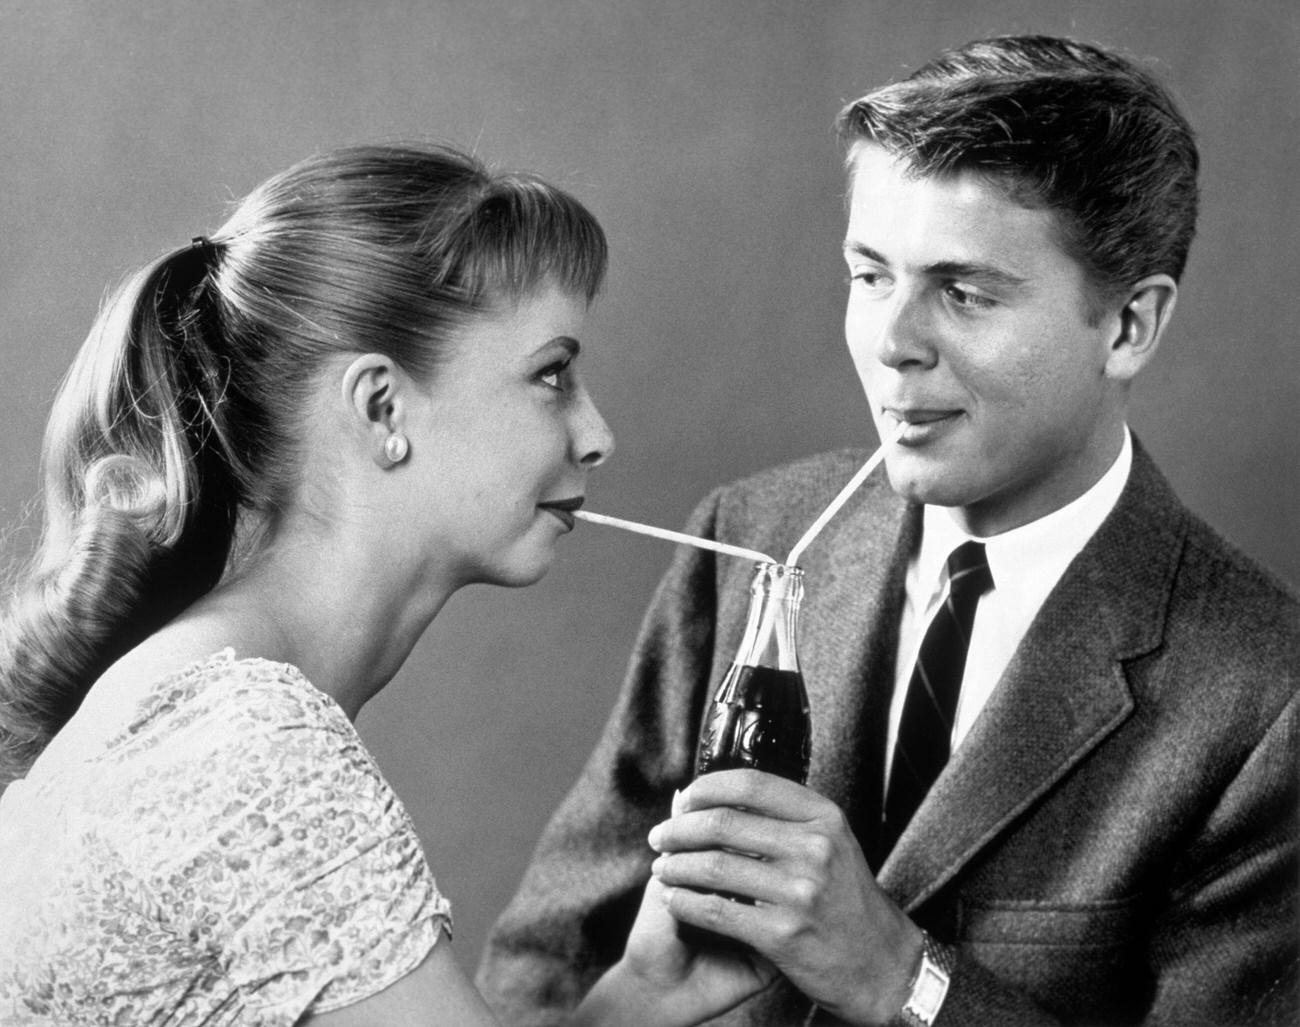 Teenage couple sharing a single bottle of soda with two straws, 1950s.